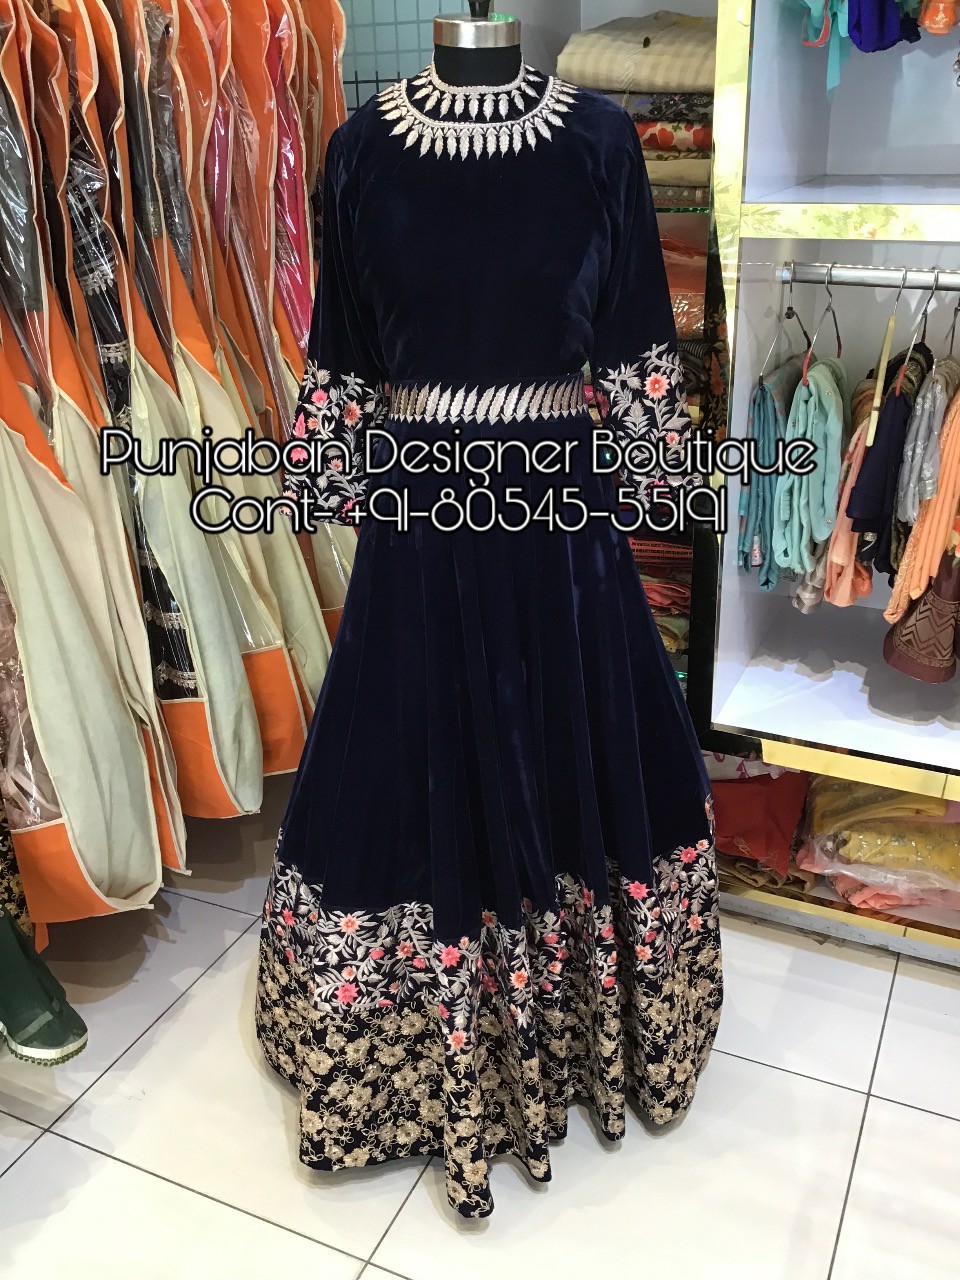 shop for party dresses in malaysia